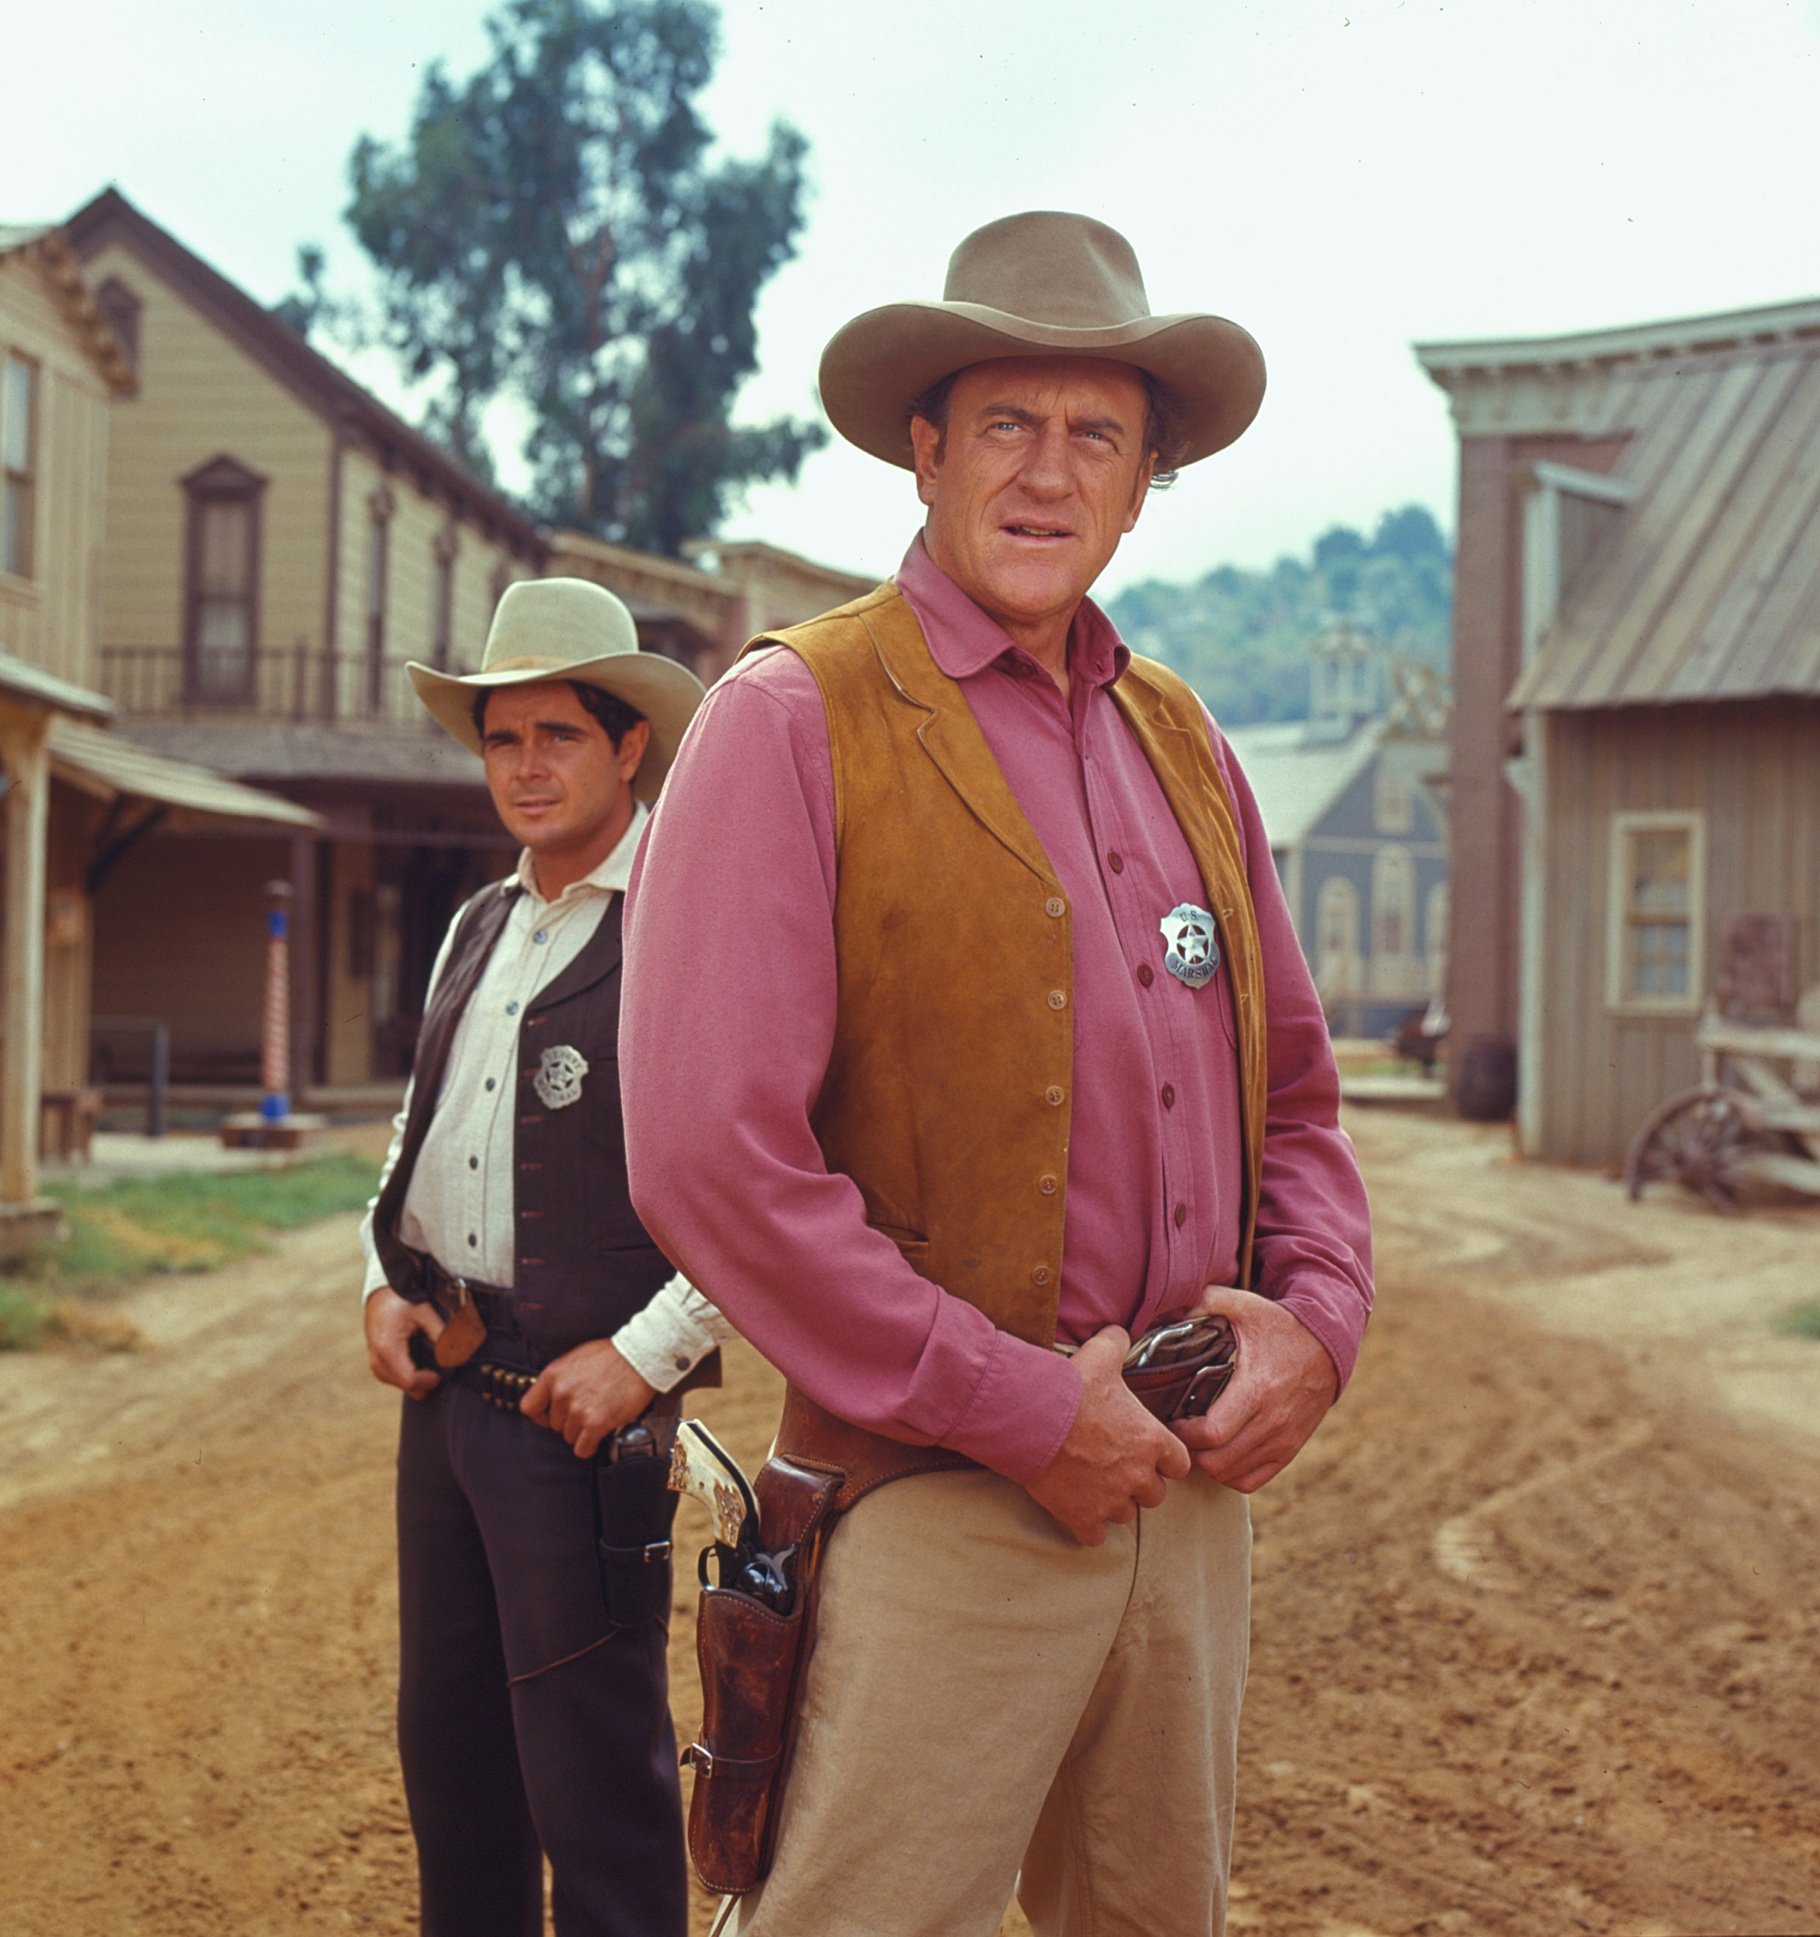 Promotional portrait of American actors James Arness (as U. S. Marshal Matt Dillon) (foreground) and Buck Taylor (as Newly O'Brien) from the television series 'Gunsmoke,' 1970. | Source: Getty Images